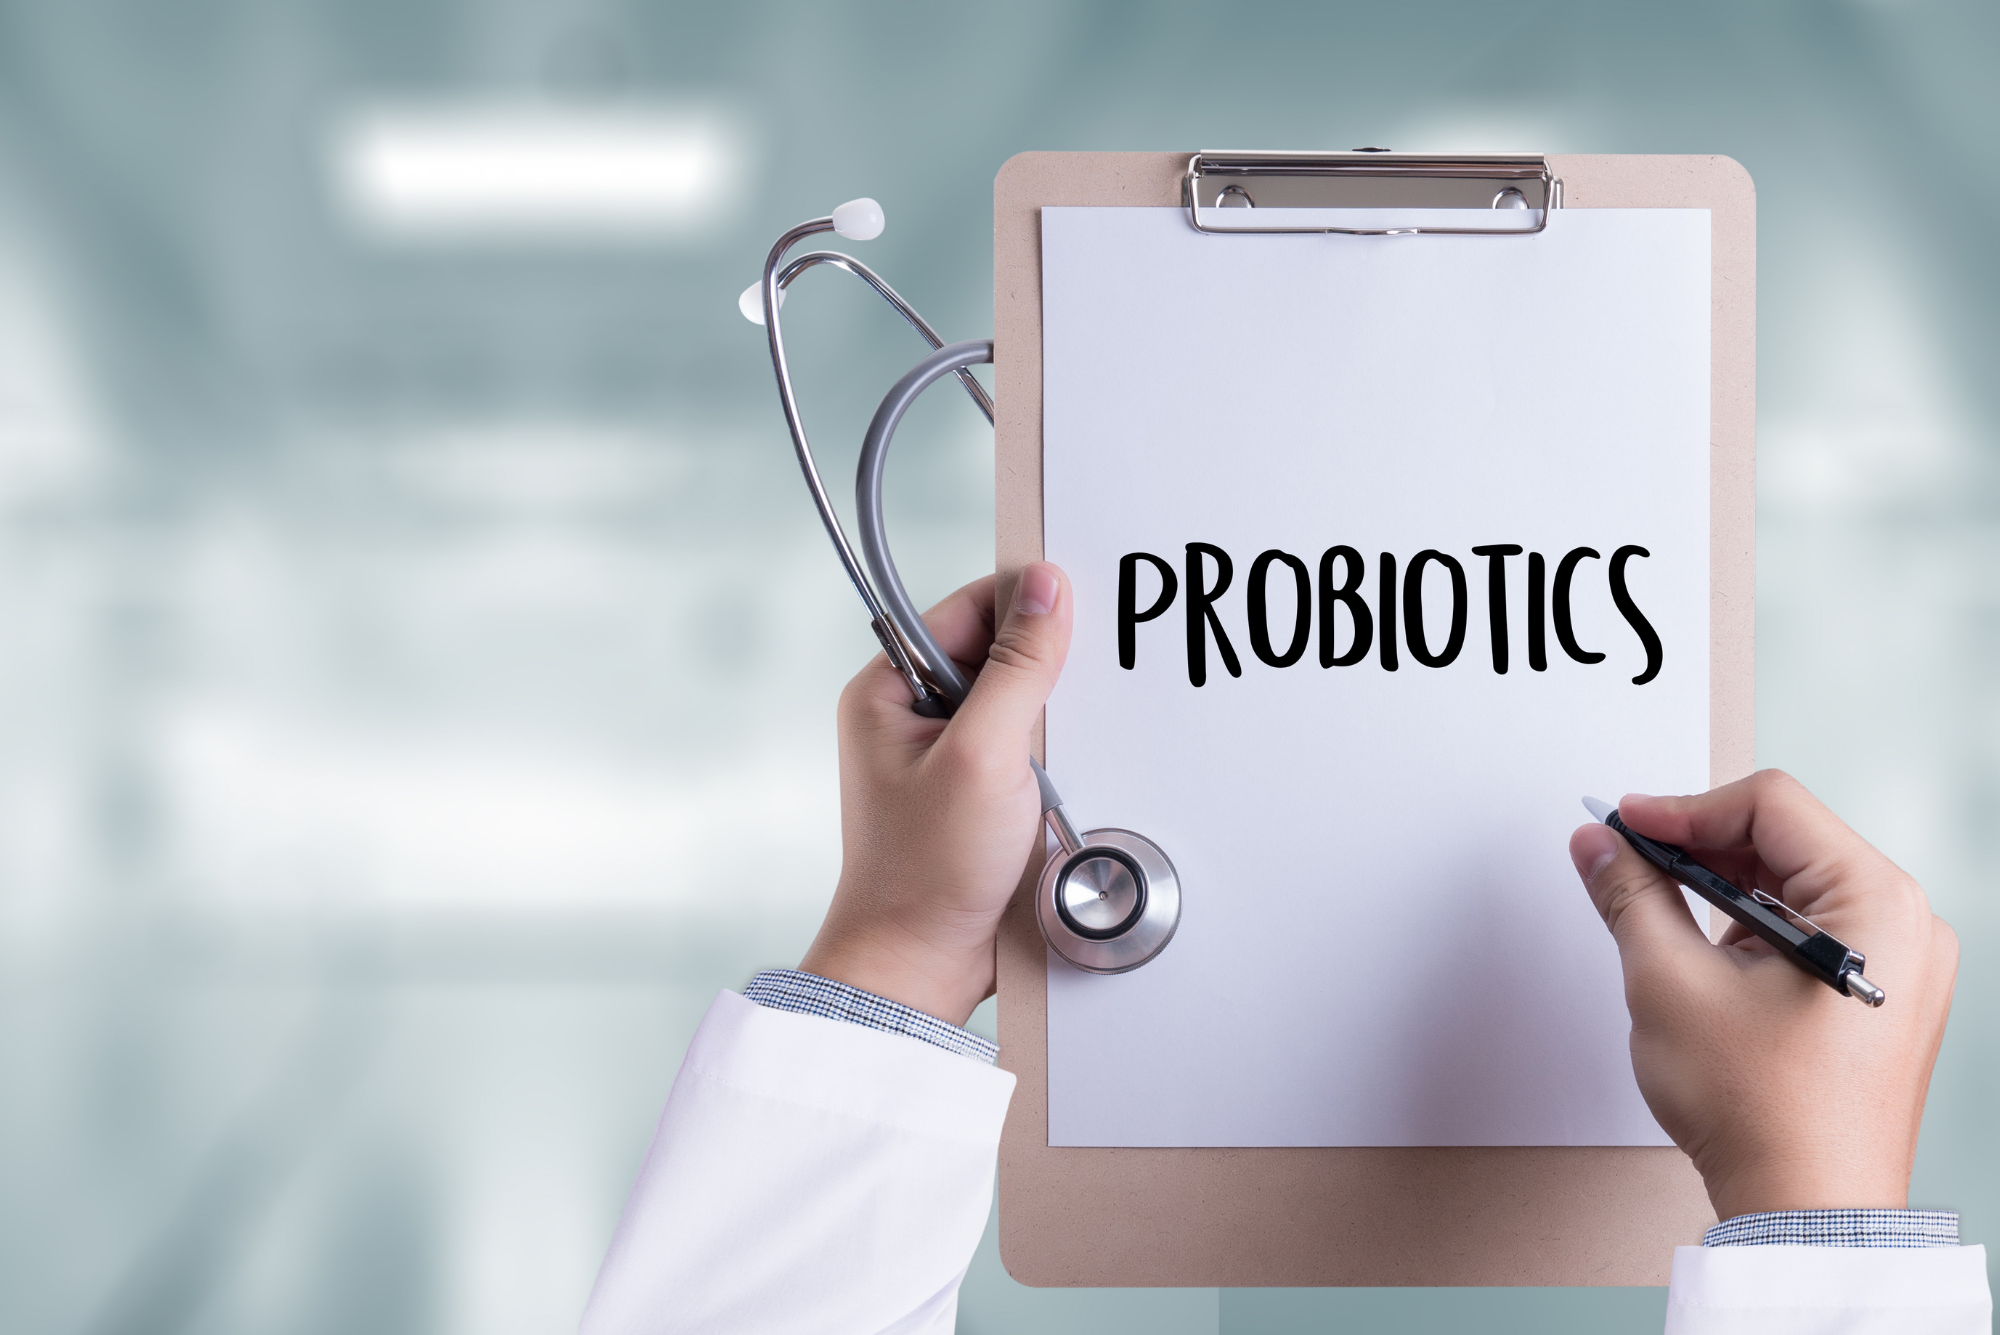 A physician holding a clipboard writes on a piece of paper to tell a patient that they can take probiotics with antibiotics.